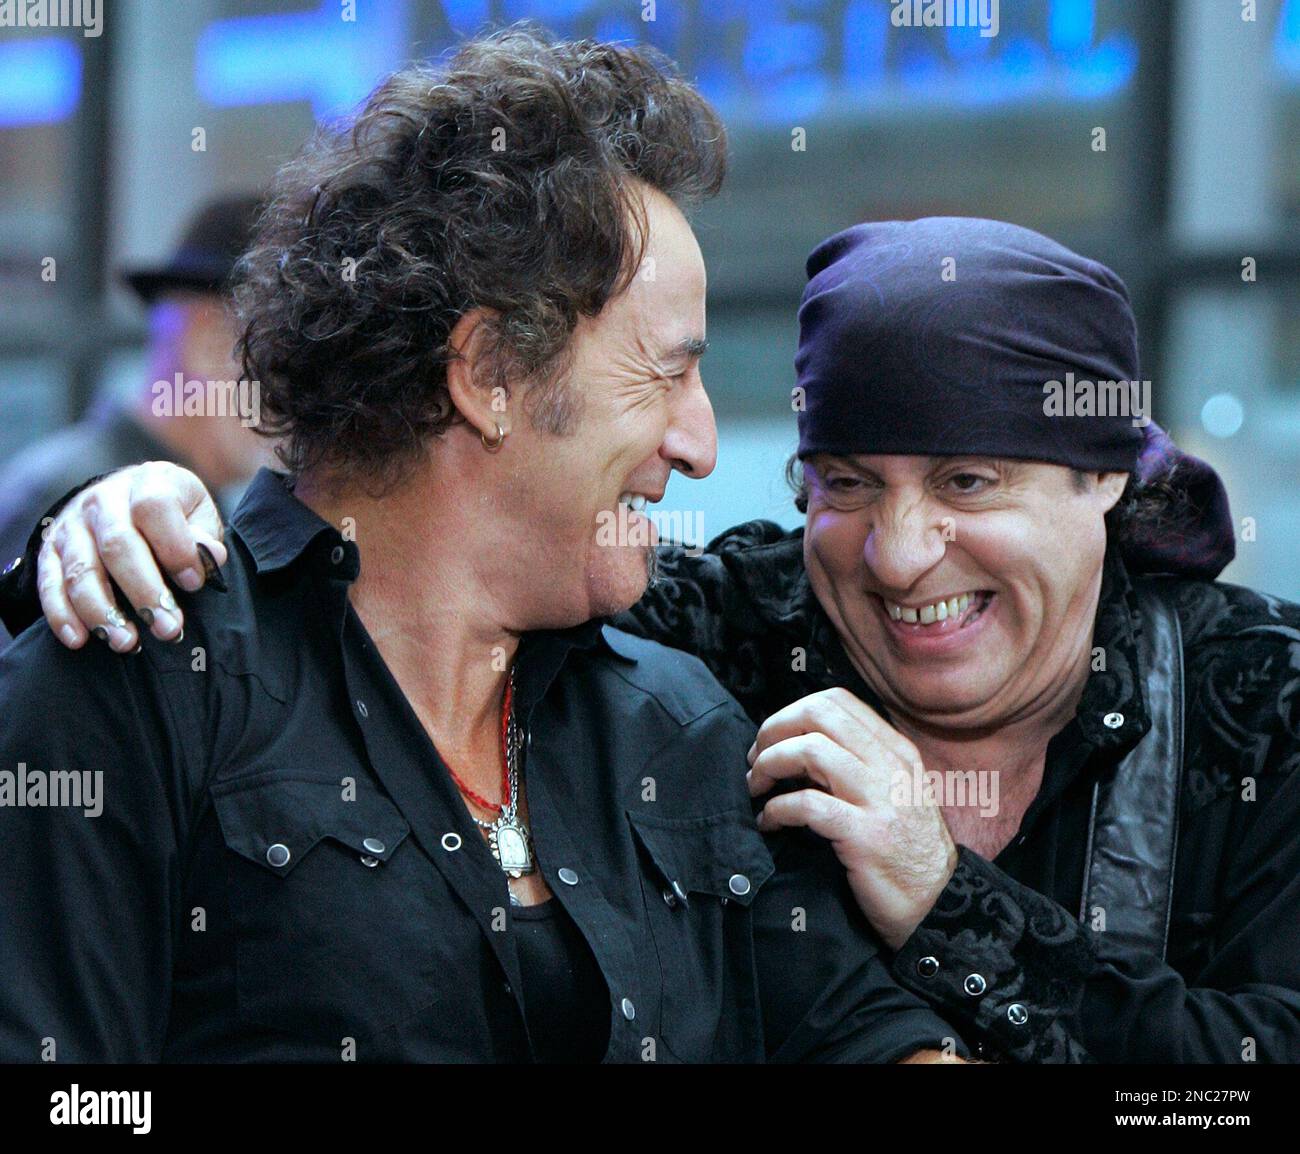 FILE - In this Sept. 28, 2007 file photo, Bruce Springsteen, left, and band member Steven Van Zandt get together between songs when they appeared on the NBC "Today" television program in New York's Rockefeller Center. With old friend Springsteen stopping by to swap music stories for the ninth anniversary of Van Zandt's rock radio show, Van Zandt laughed at the notion that he'd set the bar pretty high for the tenth year. "It's been an open invitation," said Van Zandt, guitarist in Springsteen's E Street Band. "He just finally got around to it." (AP Photo/Richard Drew, File) Stock Photo